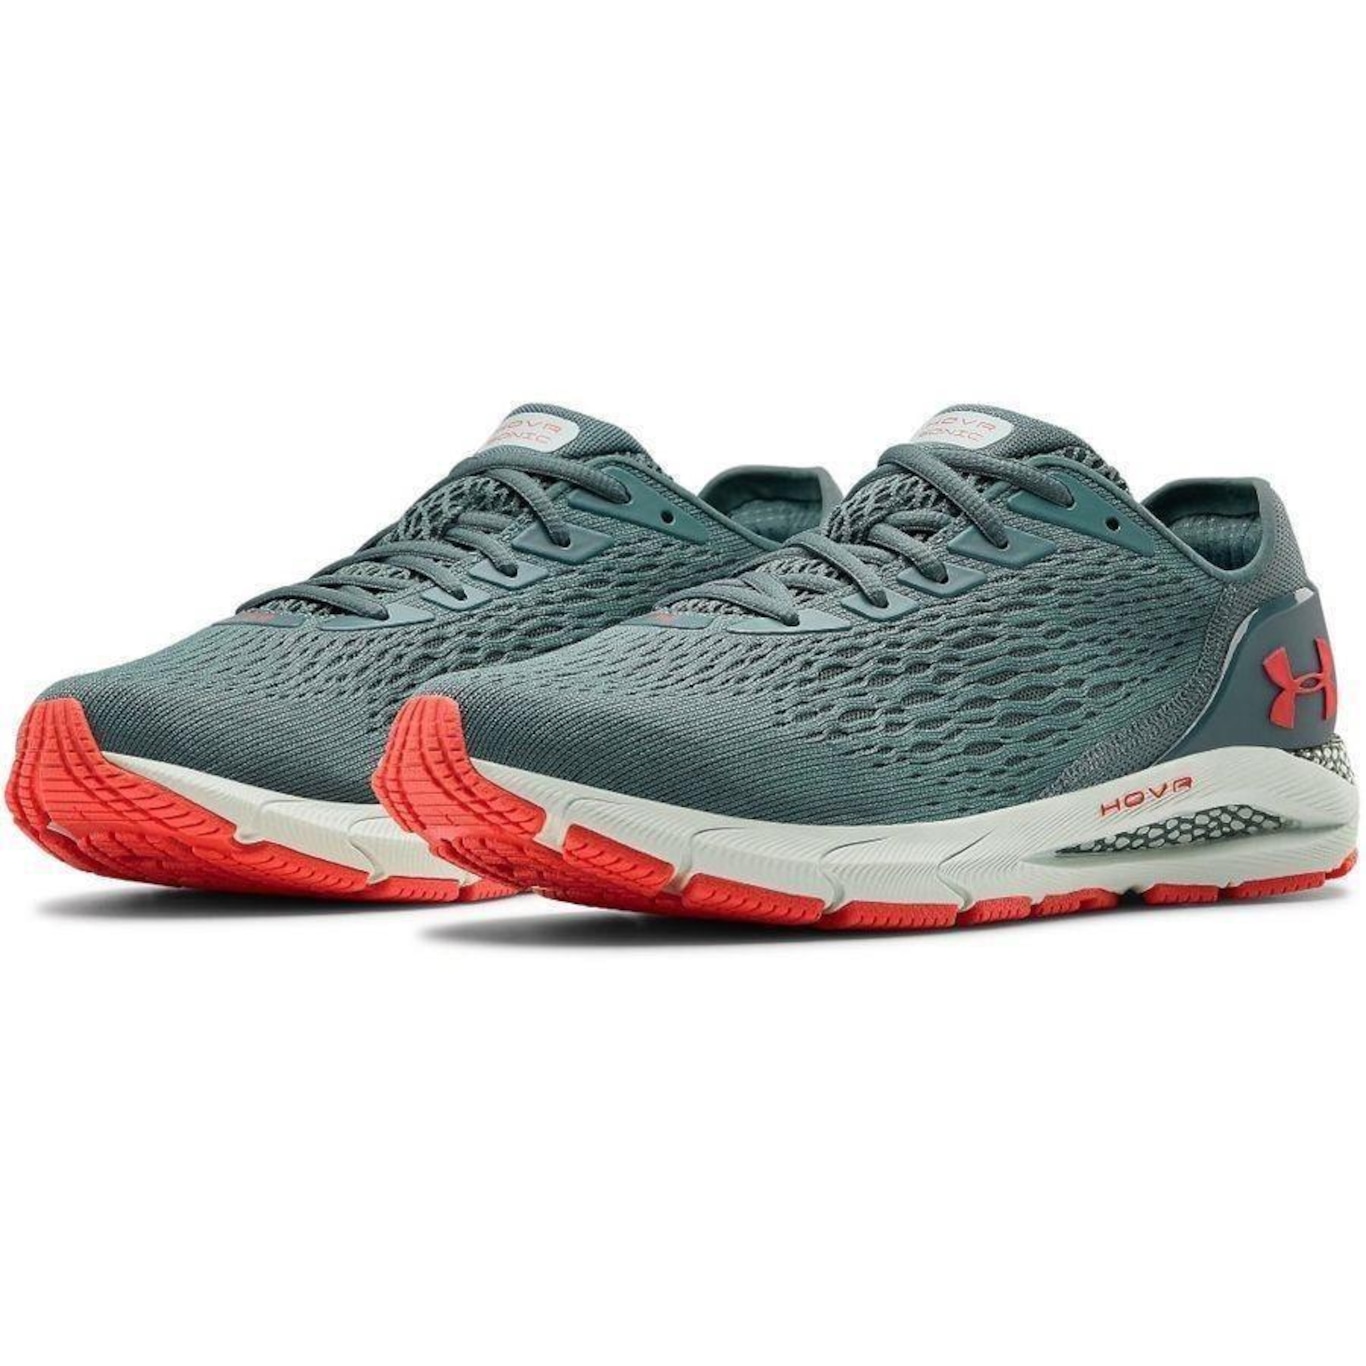 Under Armour Mens Ua HOVR Sonic 3 Running Shoes